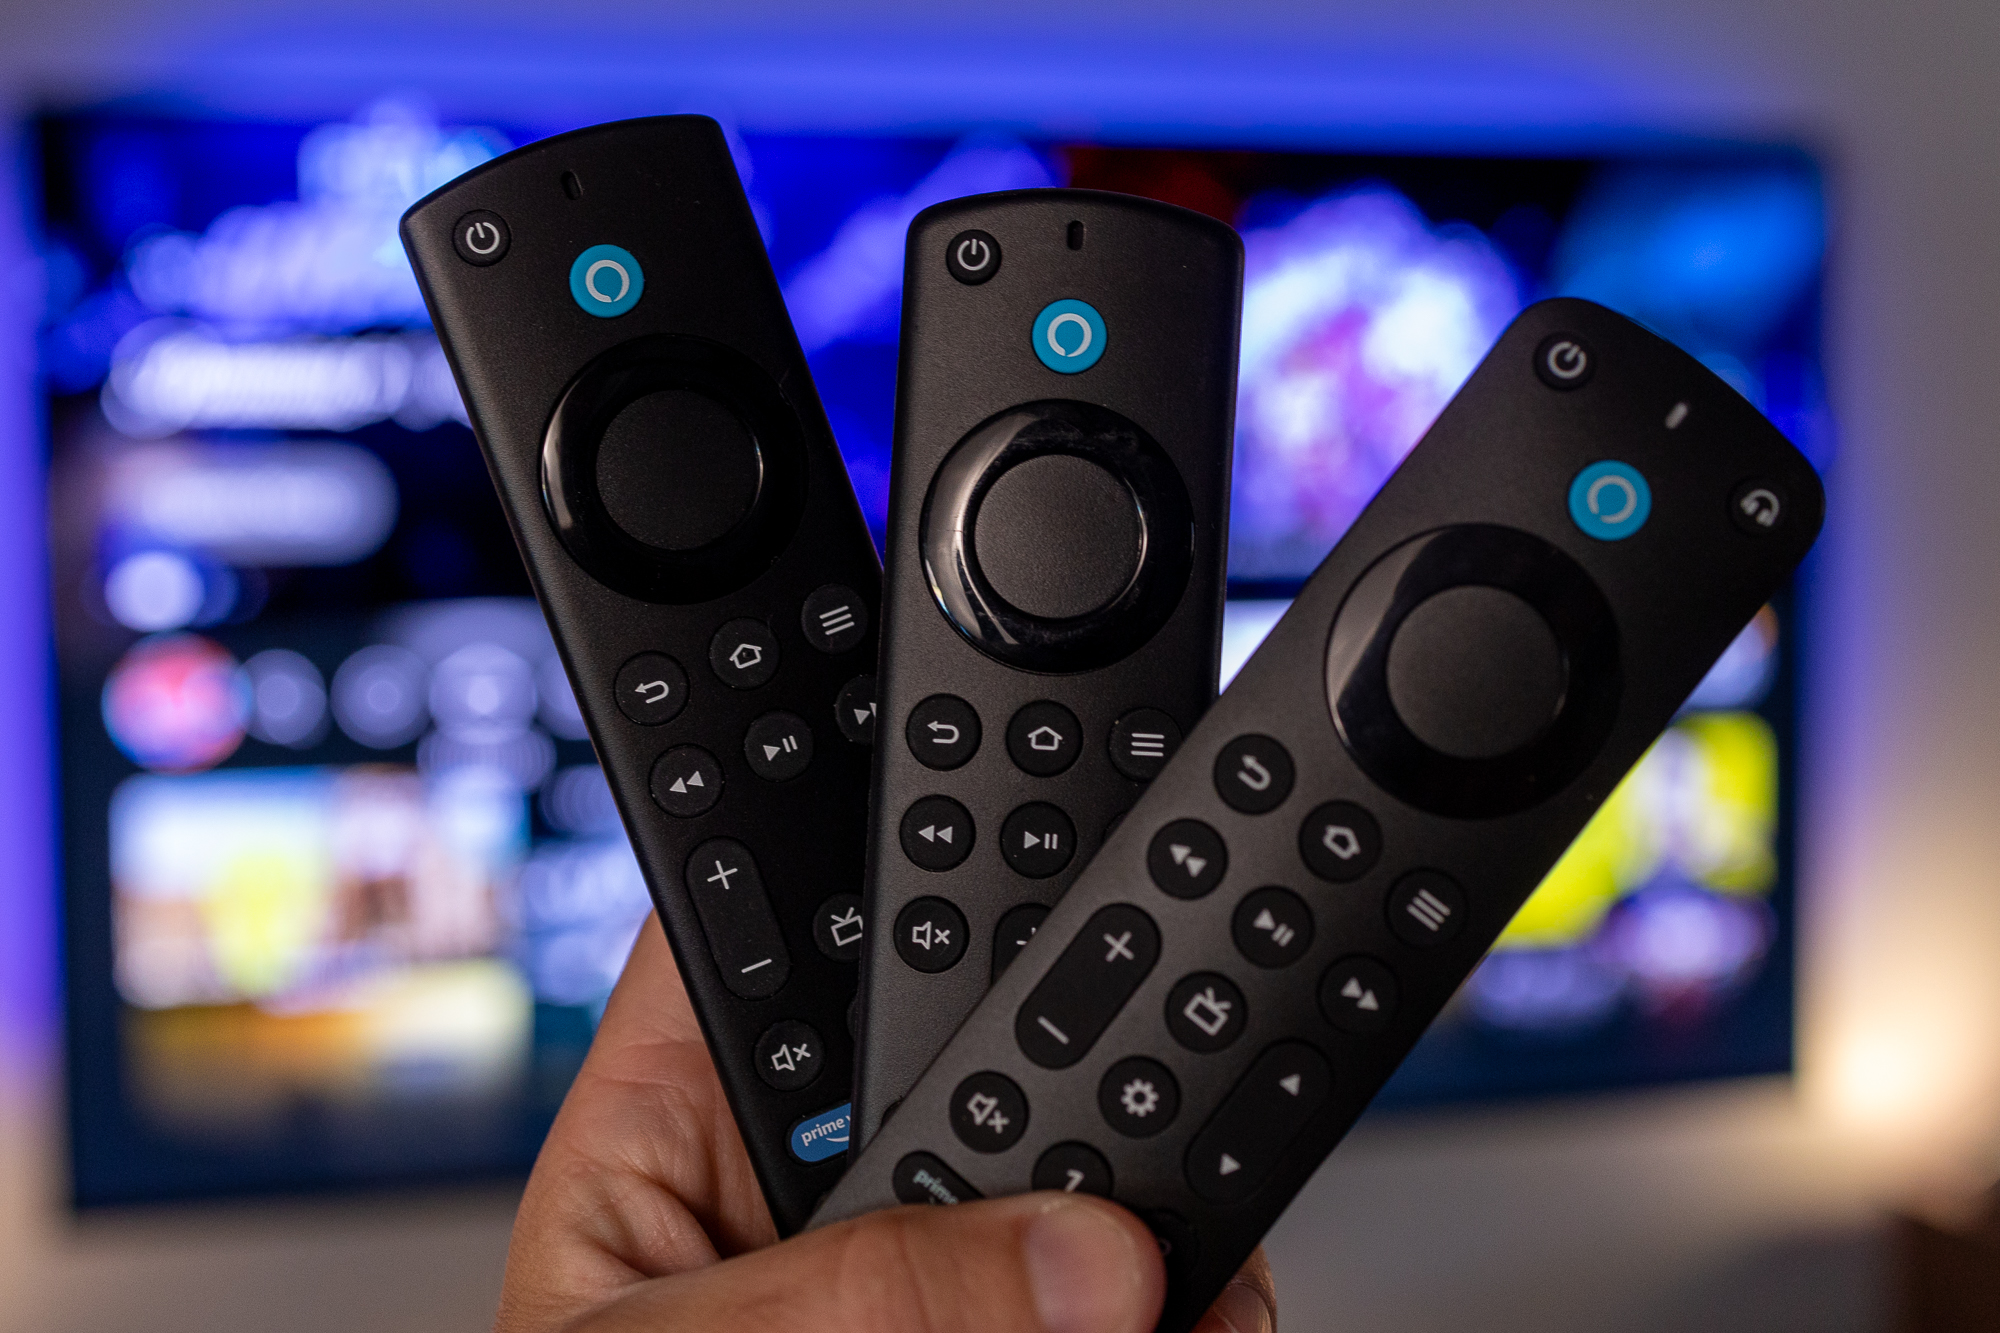 A trio of Amazon Fire TV remote controls held in a hand in front of a television.